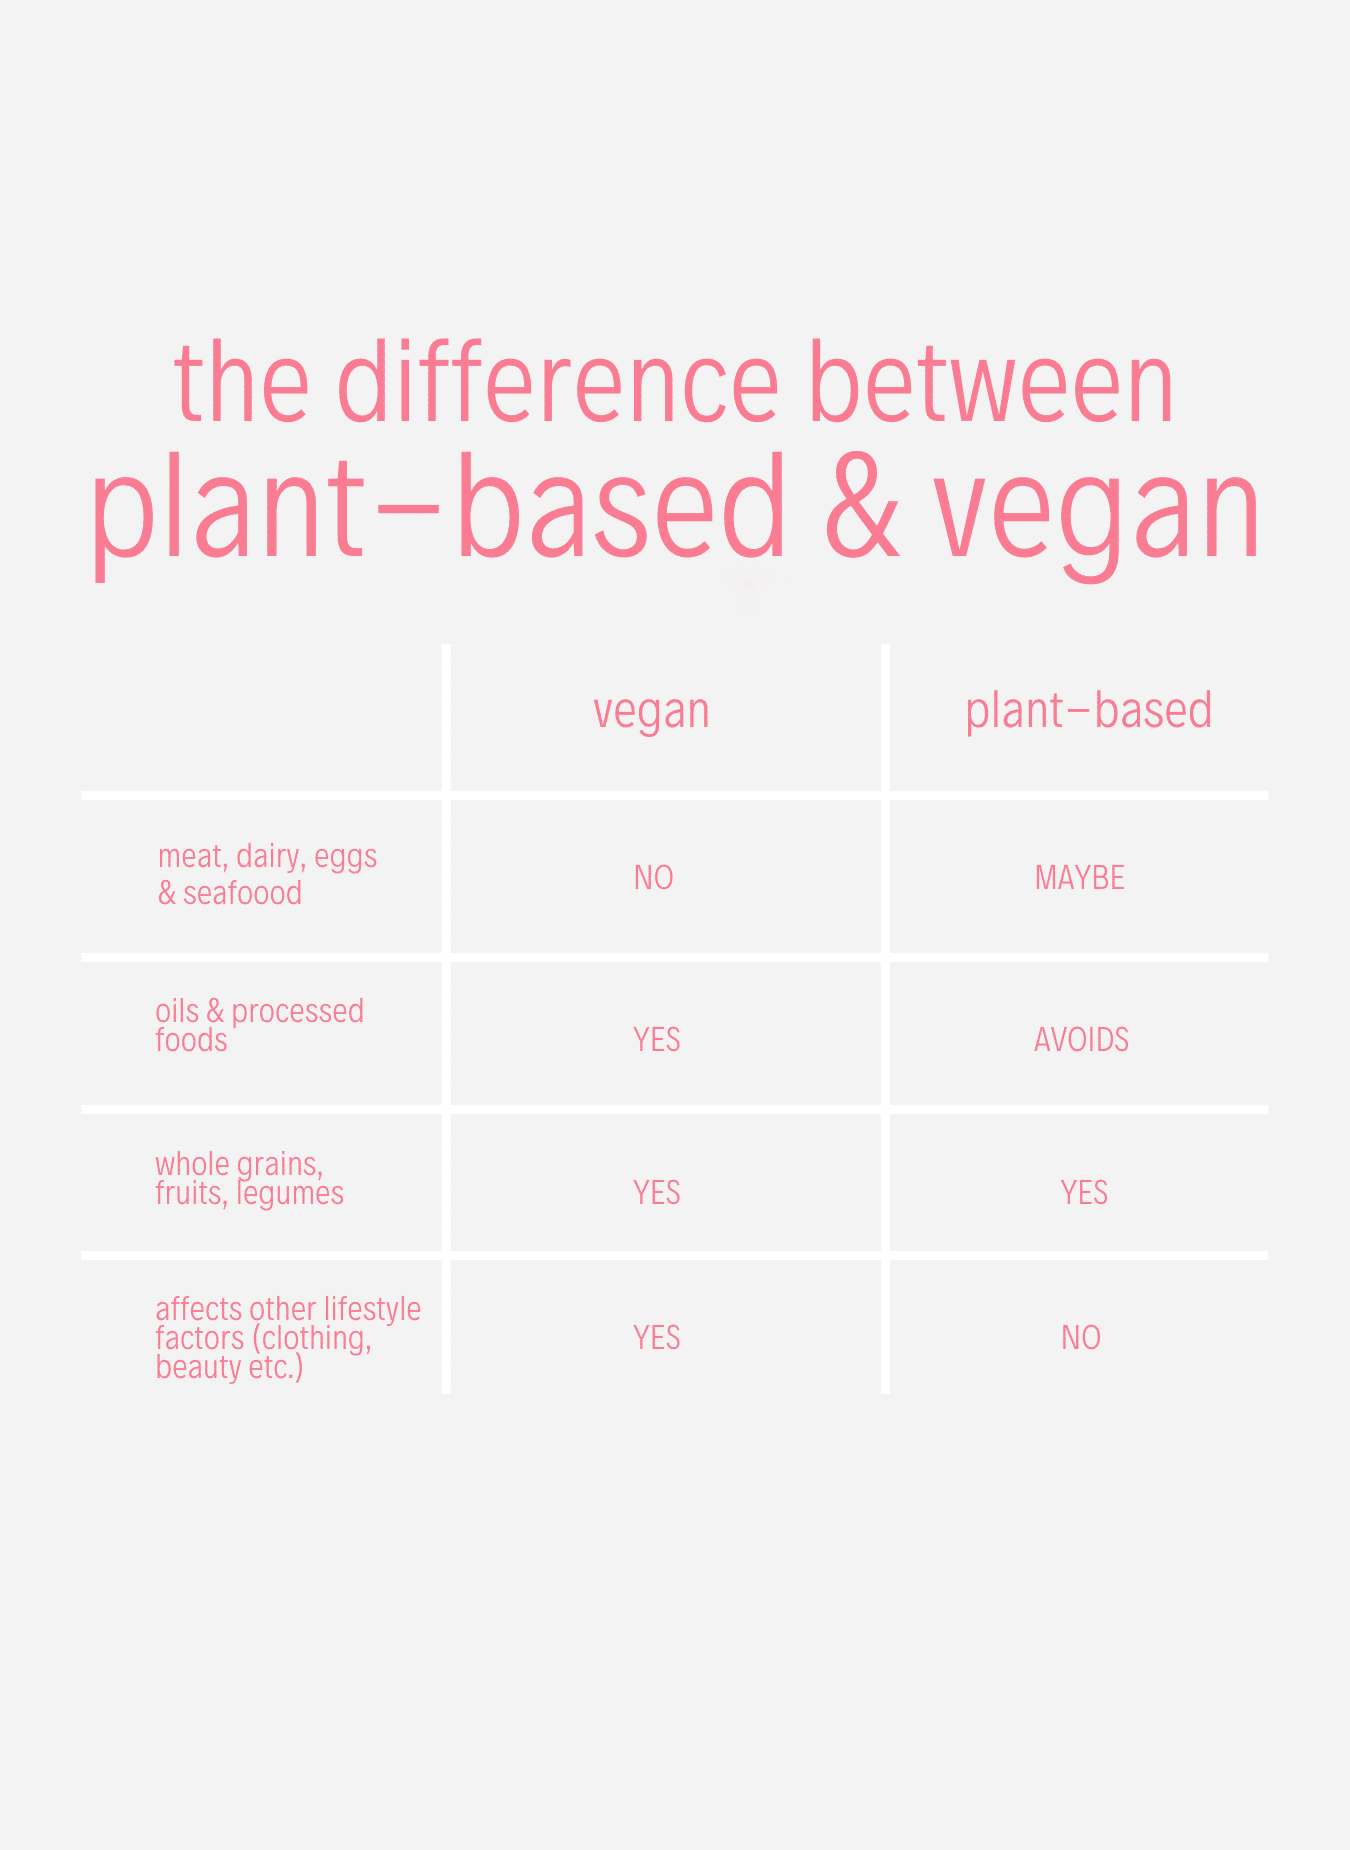 What's The Difference Between Plant Based and Vegan?